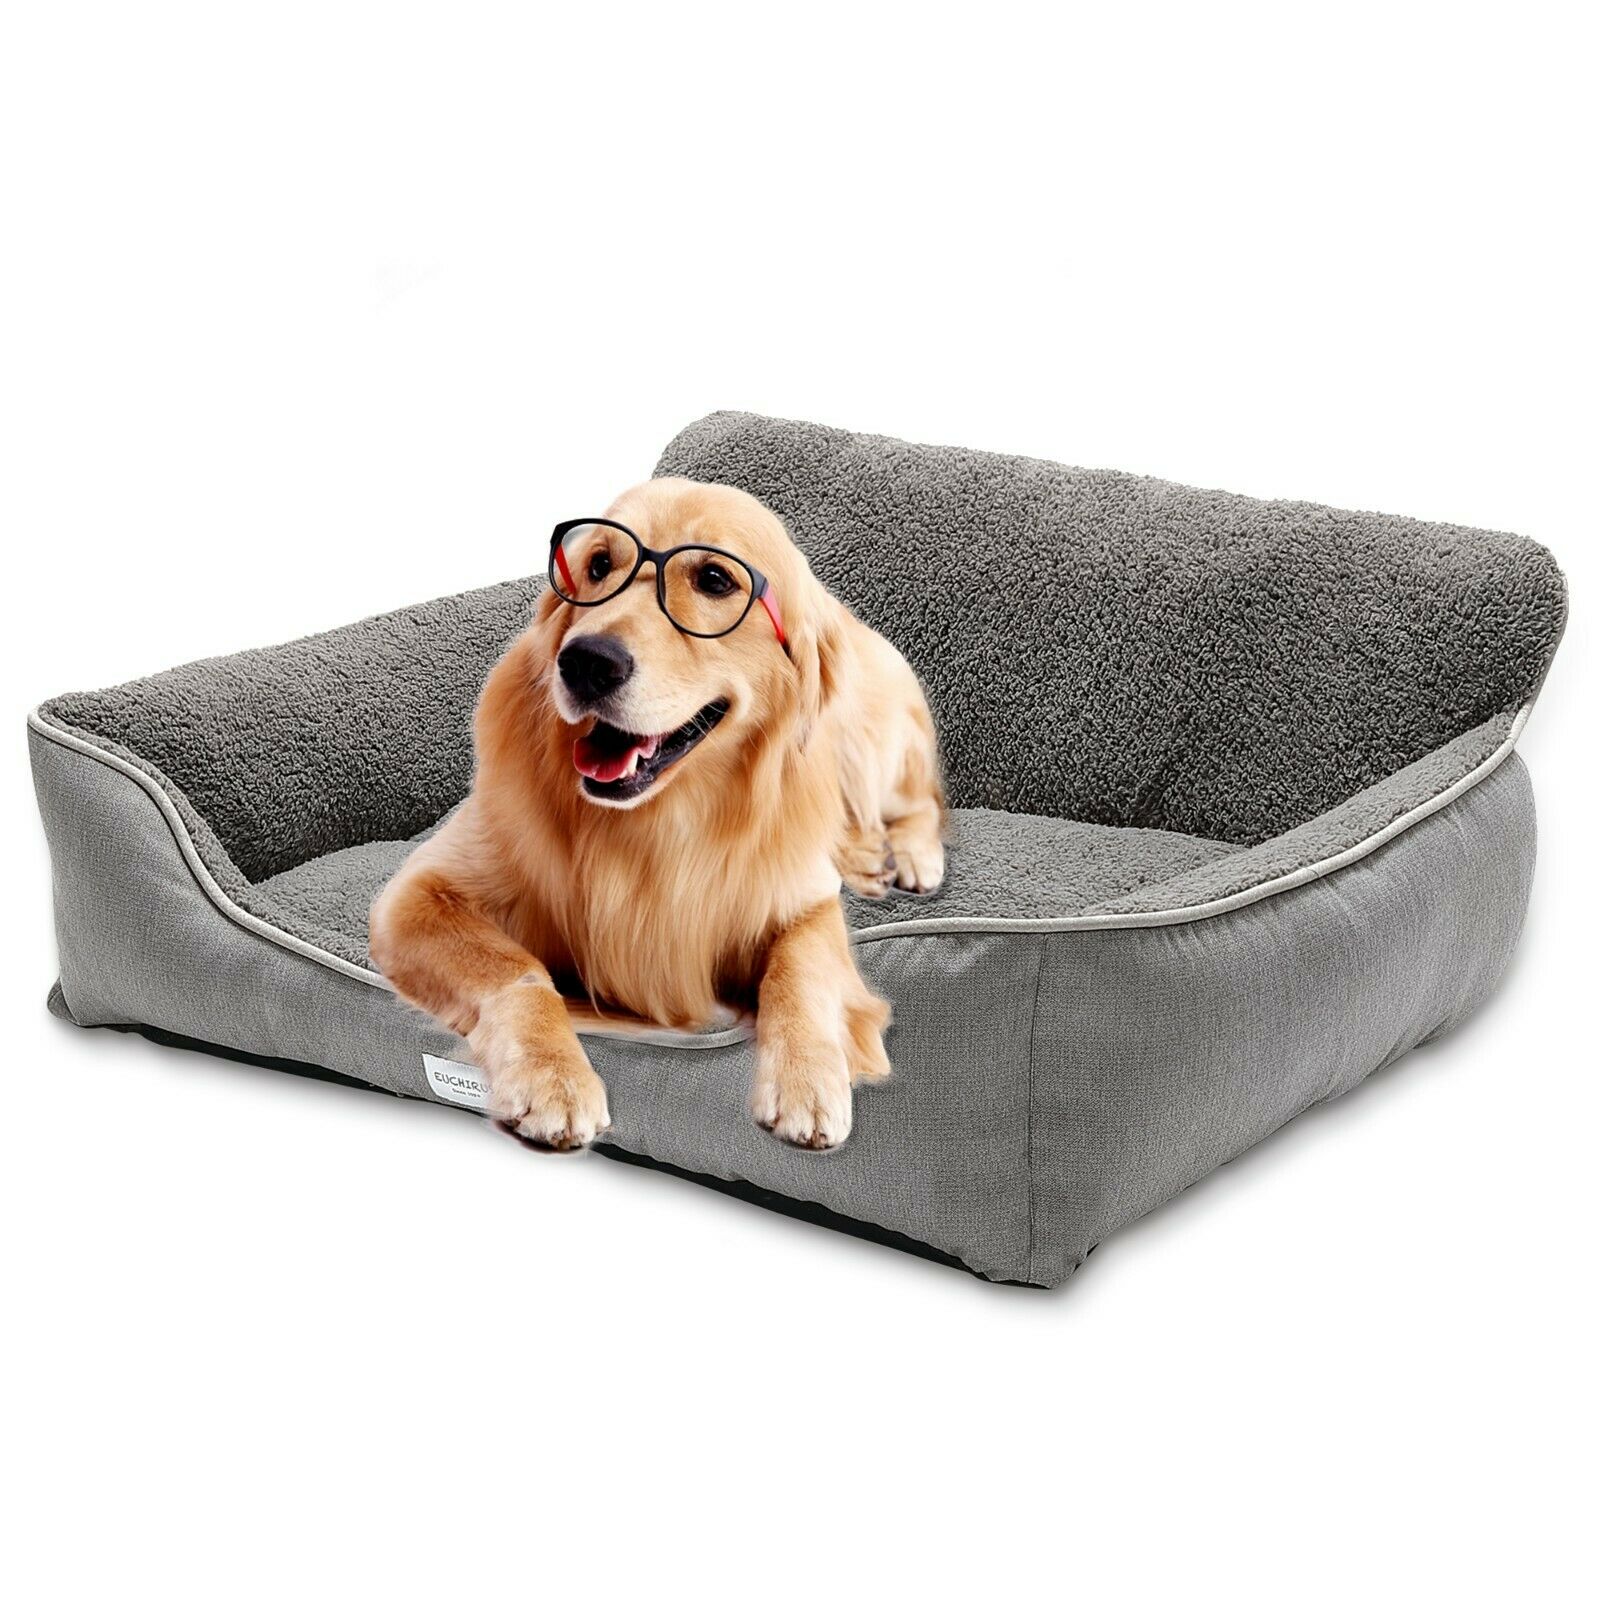 Pet Dog Bed For Medium Dogs(x-large For Large Dogs)dog Bed With Machine Washable